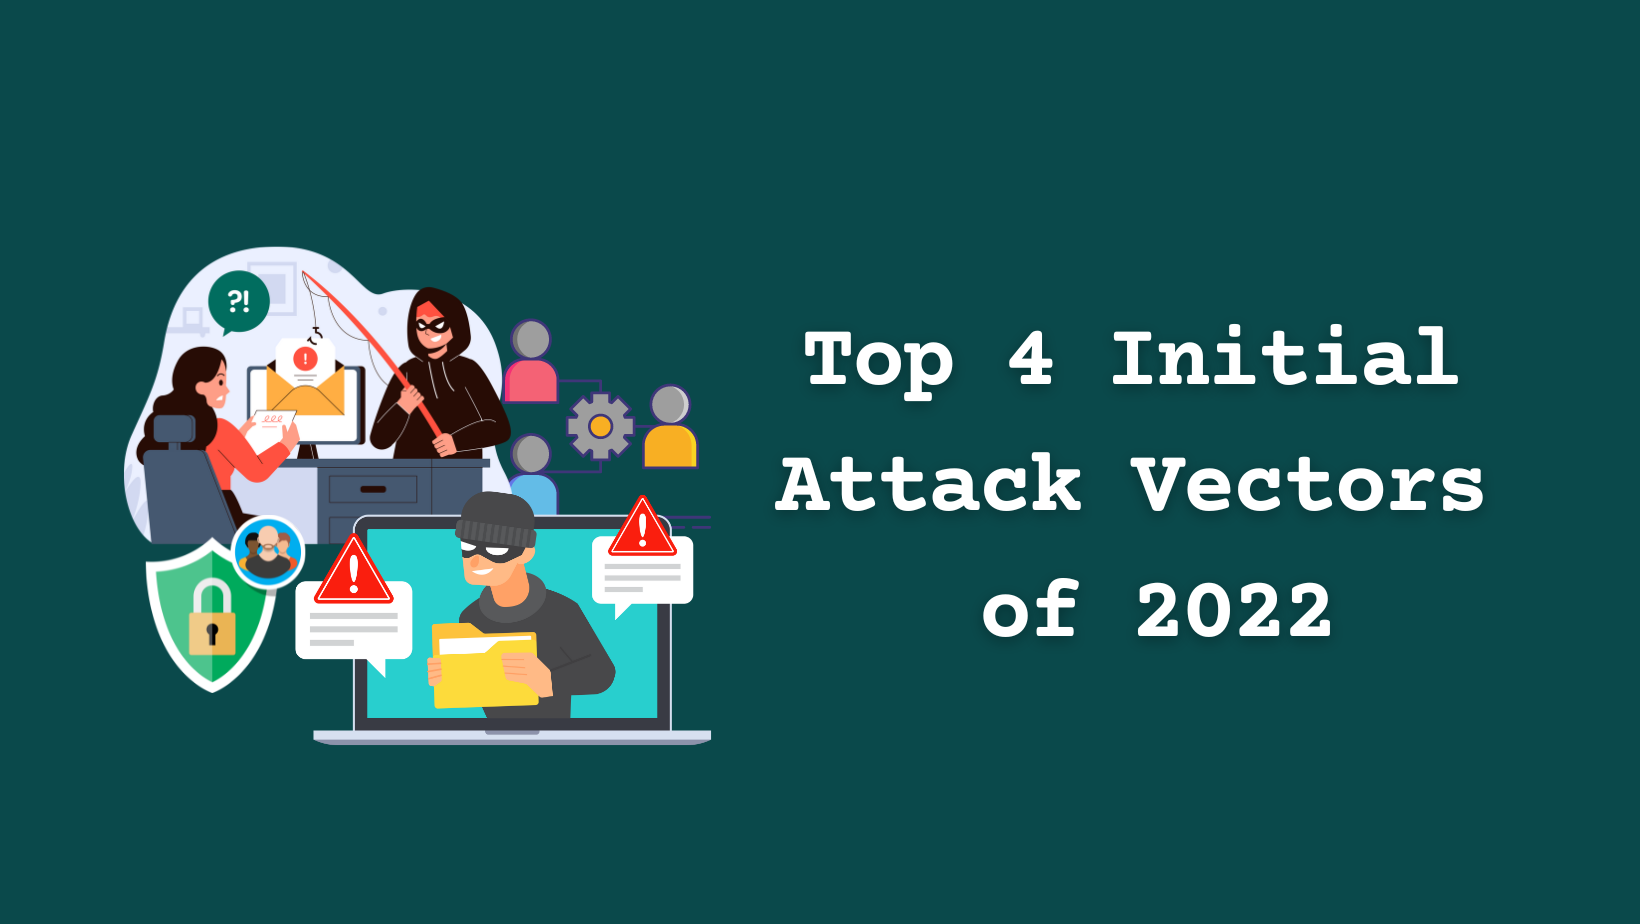 The Top 4 Initial Attack Vectors of 2022: What You Need to Know